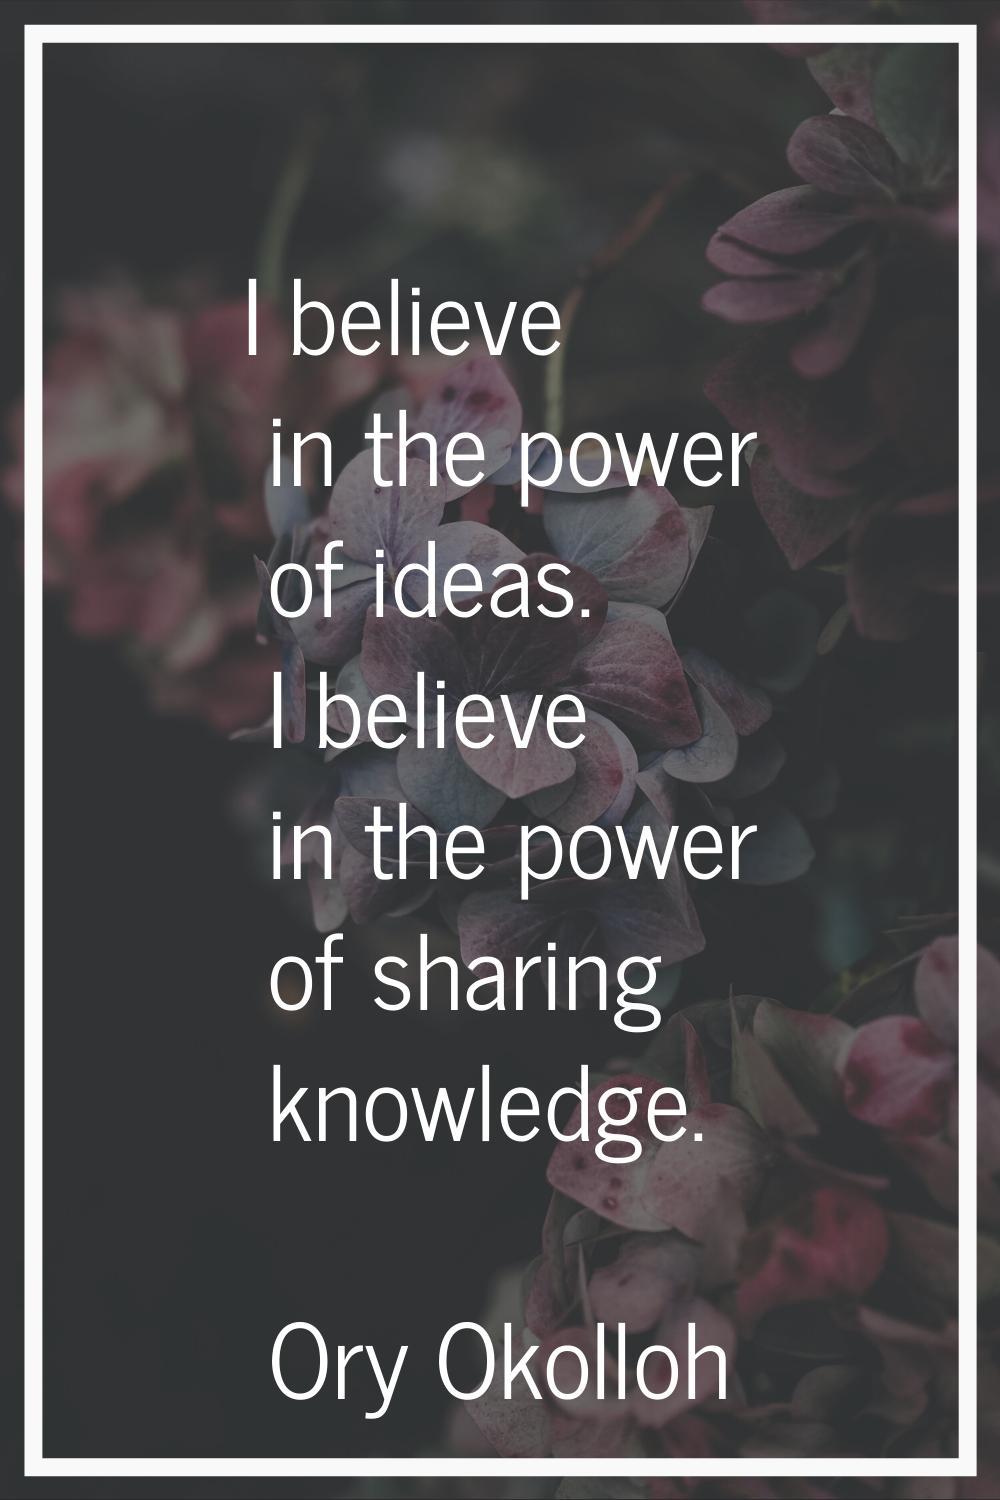 I believe in the power of ideas. I believe in the power of sharing knowledge.